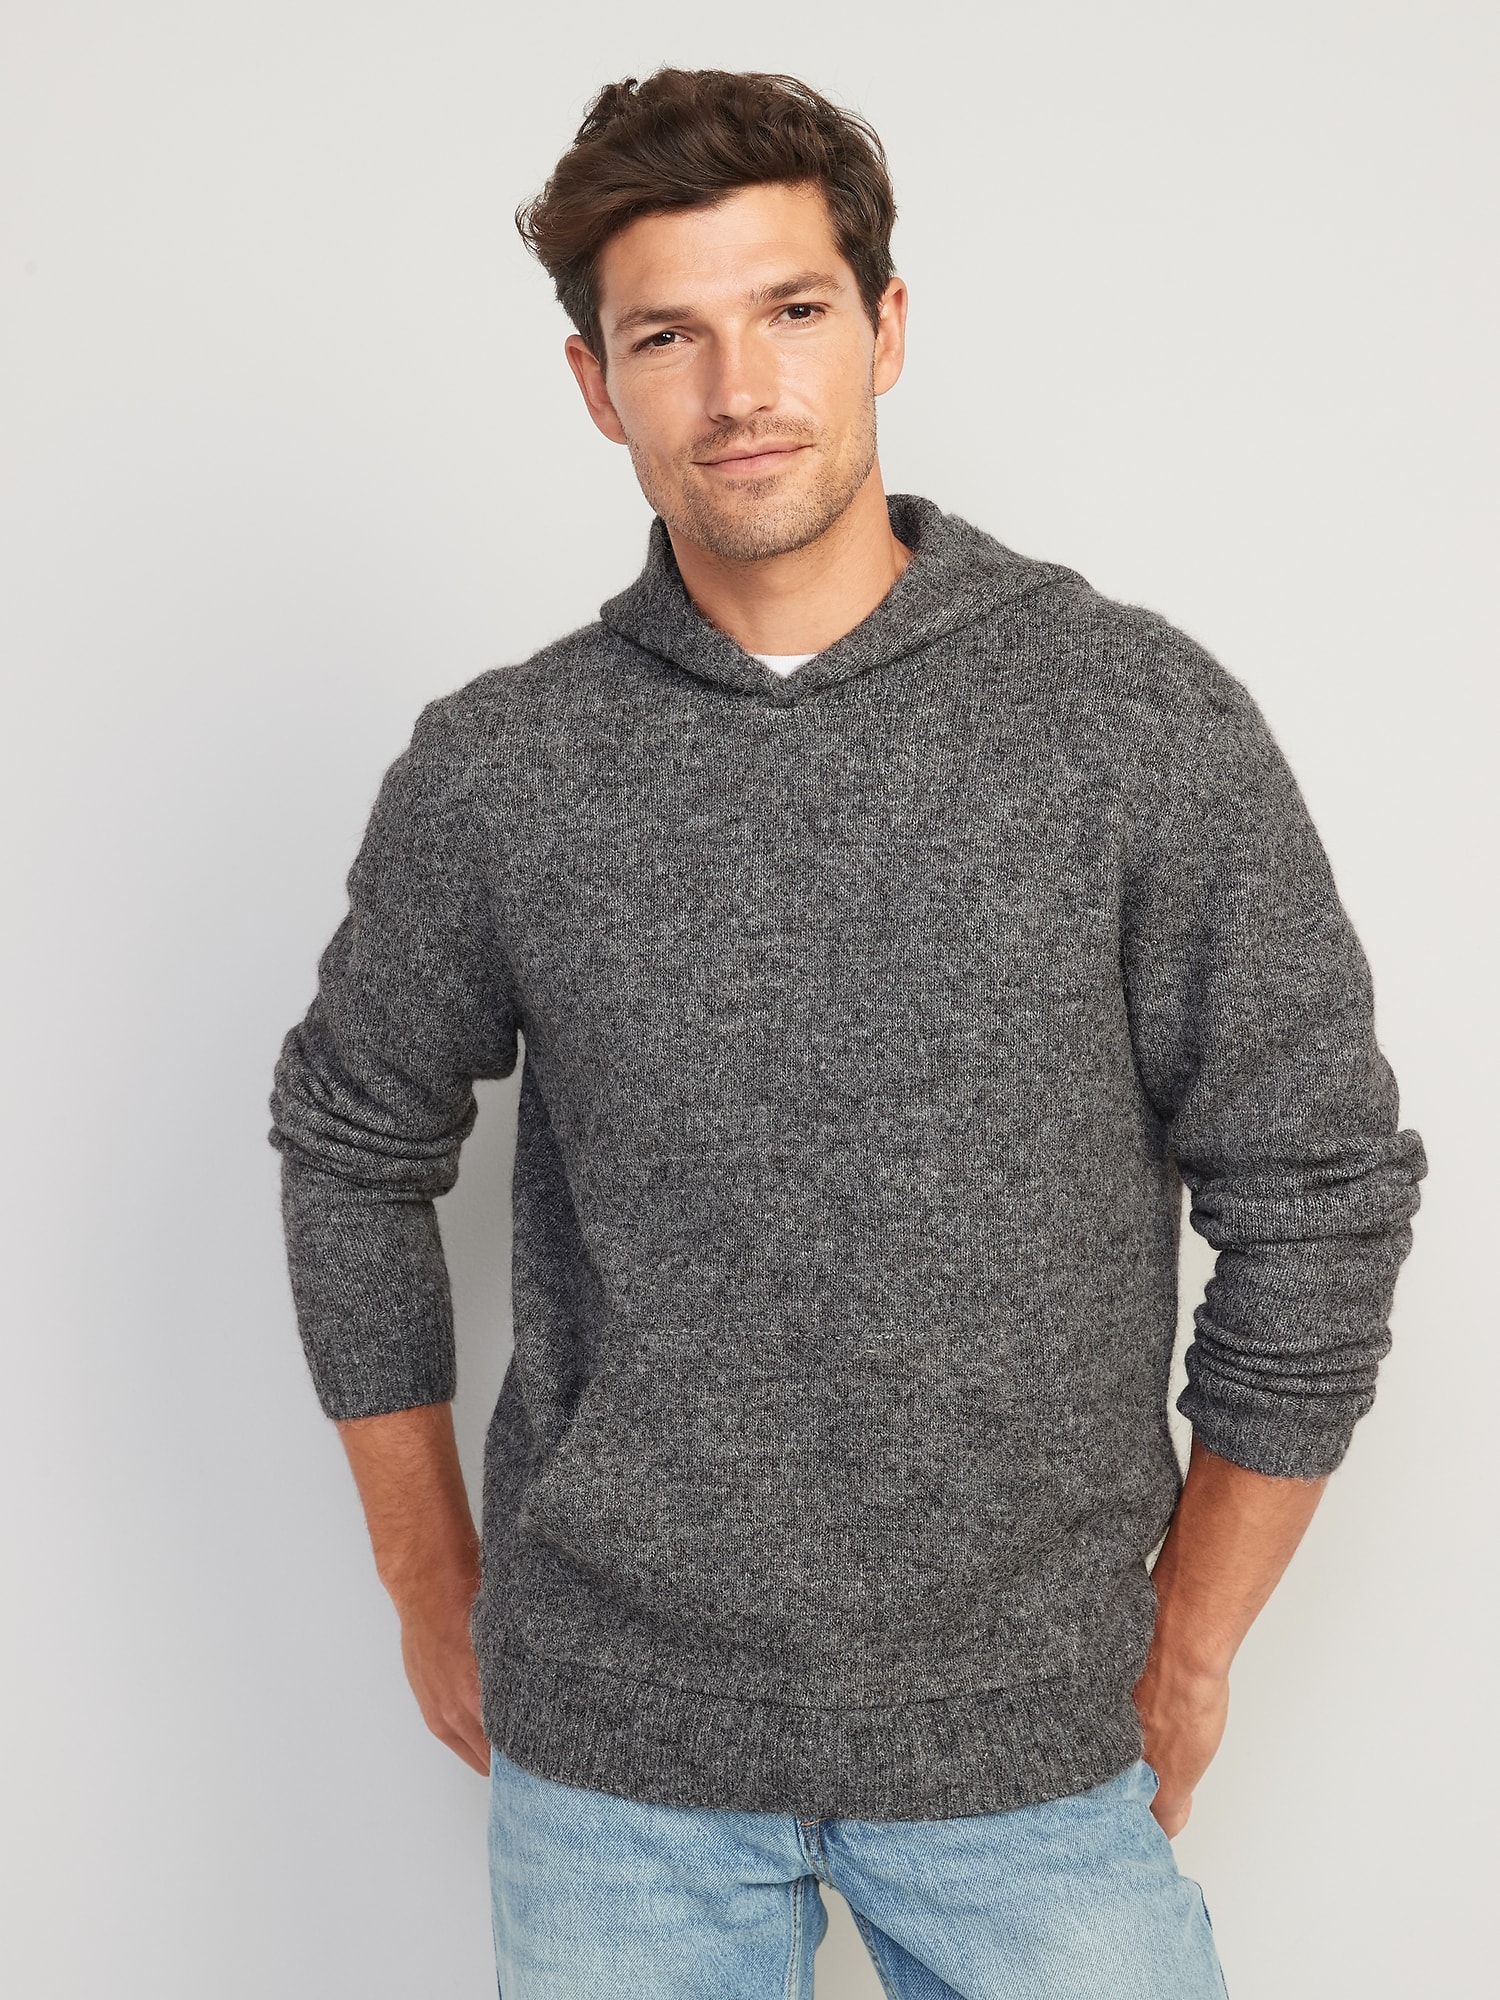 Hoodie Loose-Fit Pullover Old Sweater Navy | Men for